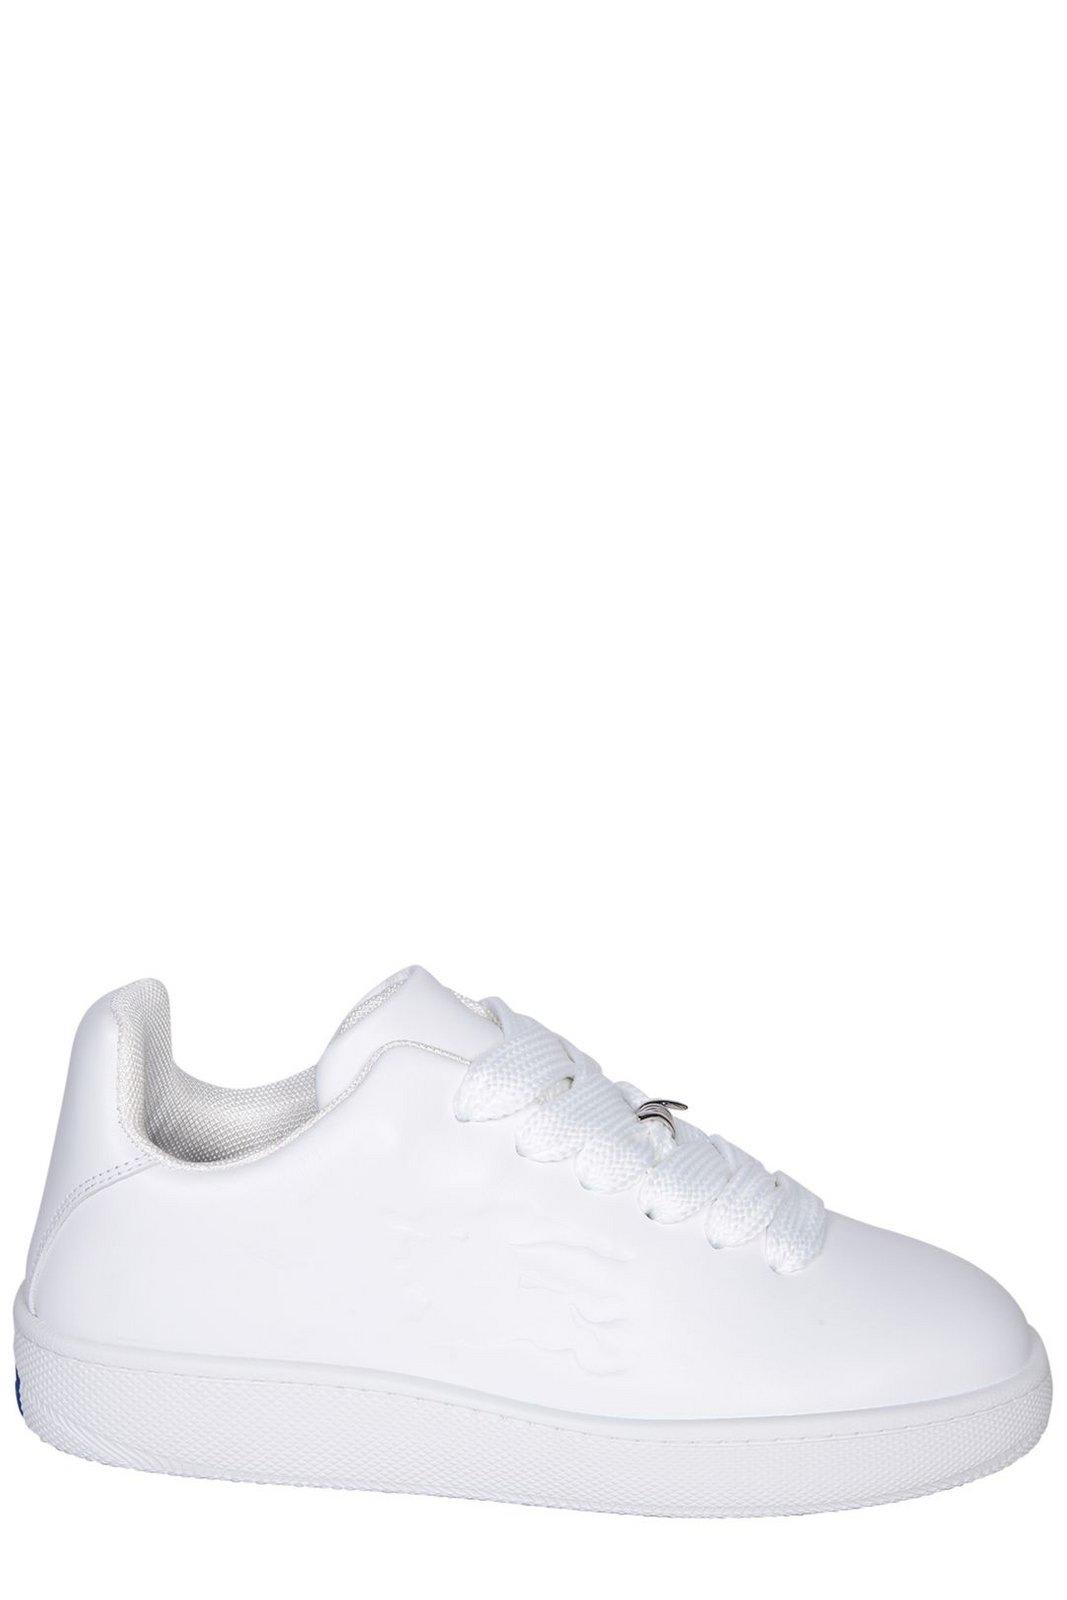 BURBERRY LOGO EMBOSSED LACE-UP SNEAKERS